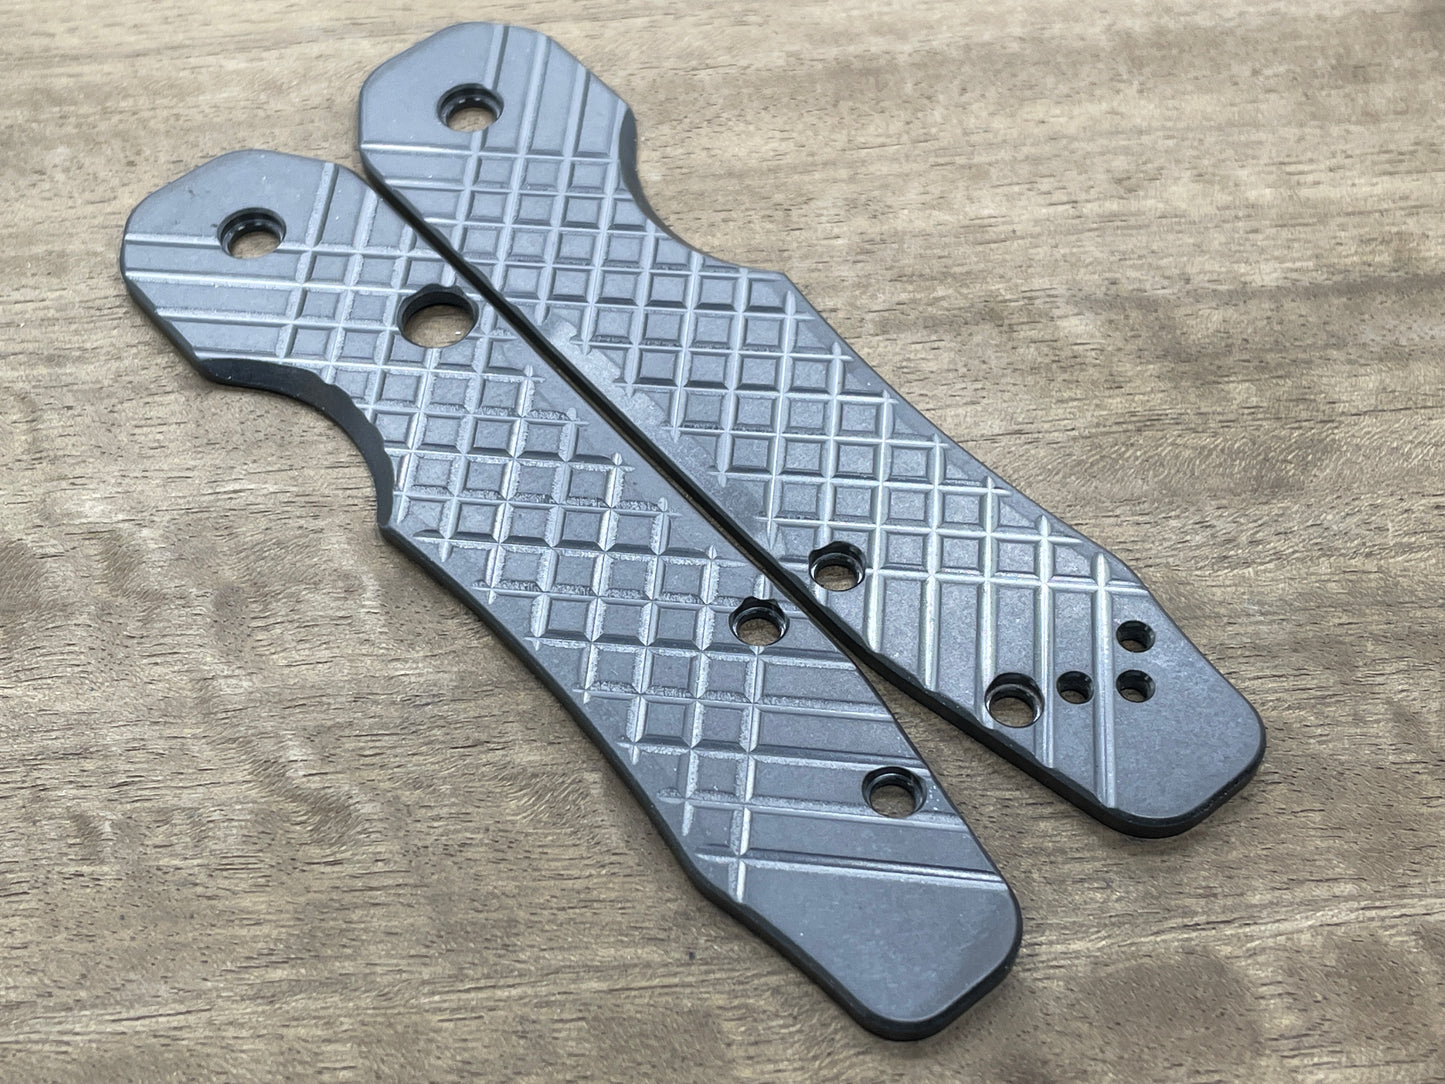 TUMBLED FRAG Cnc milled Zirconium Scales for Spyderco SMOCK